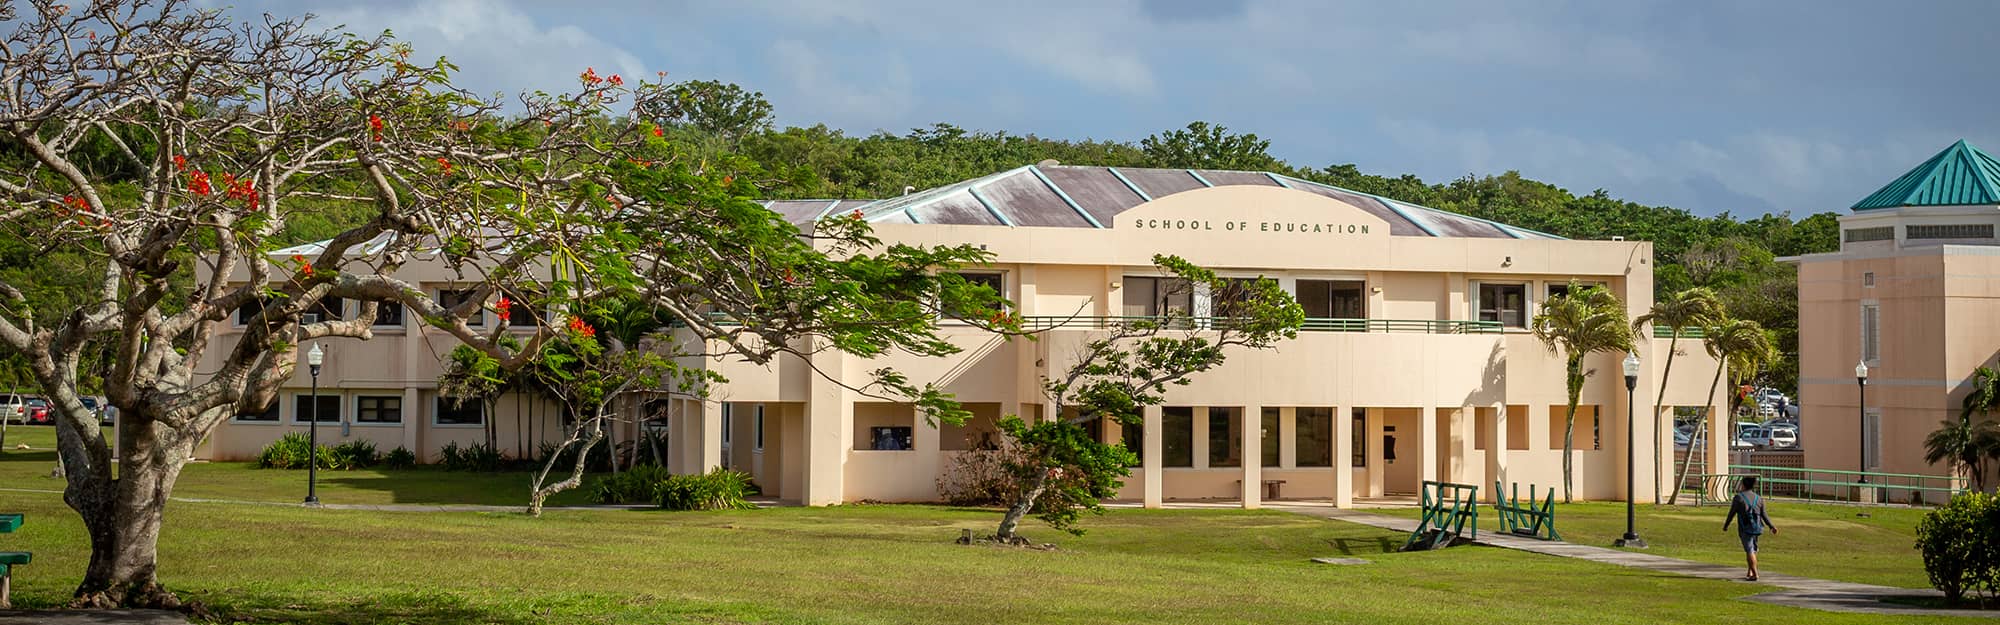 Photo of the UOG School of Education building